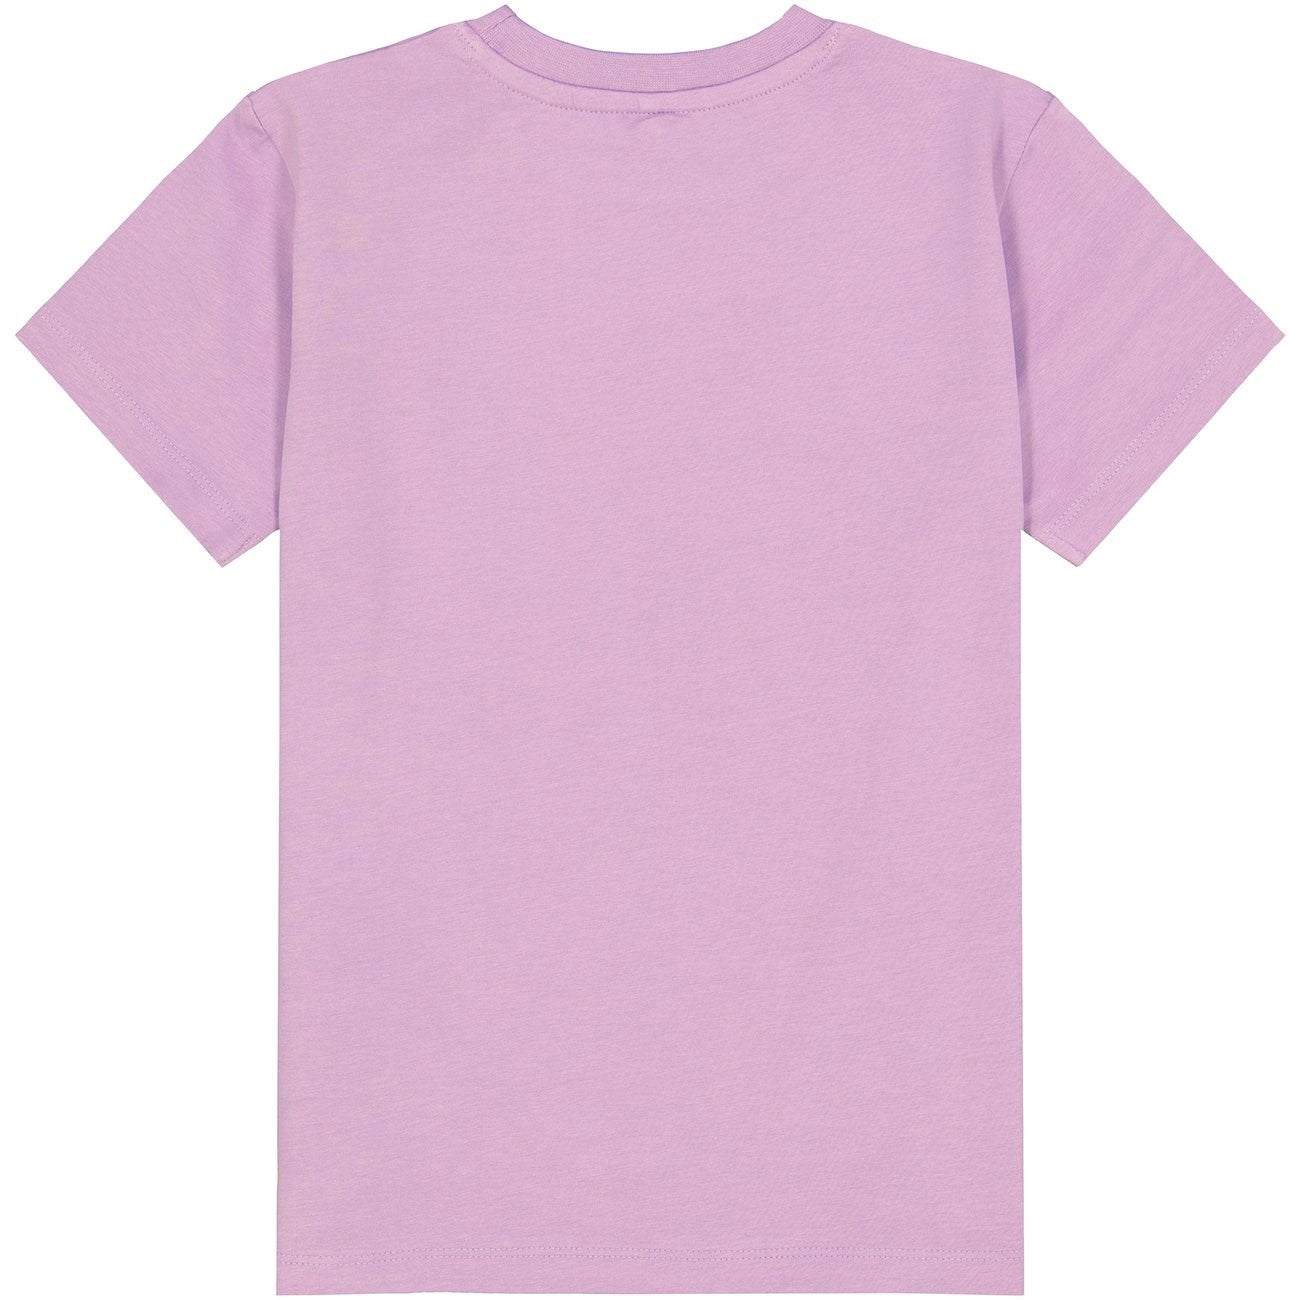 The New Lavender Herb Jessica T-Shirt 5